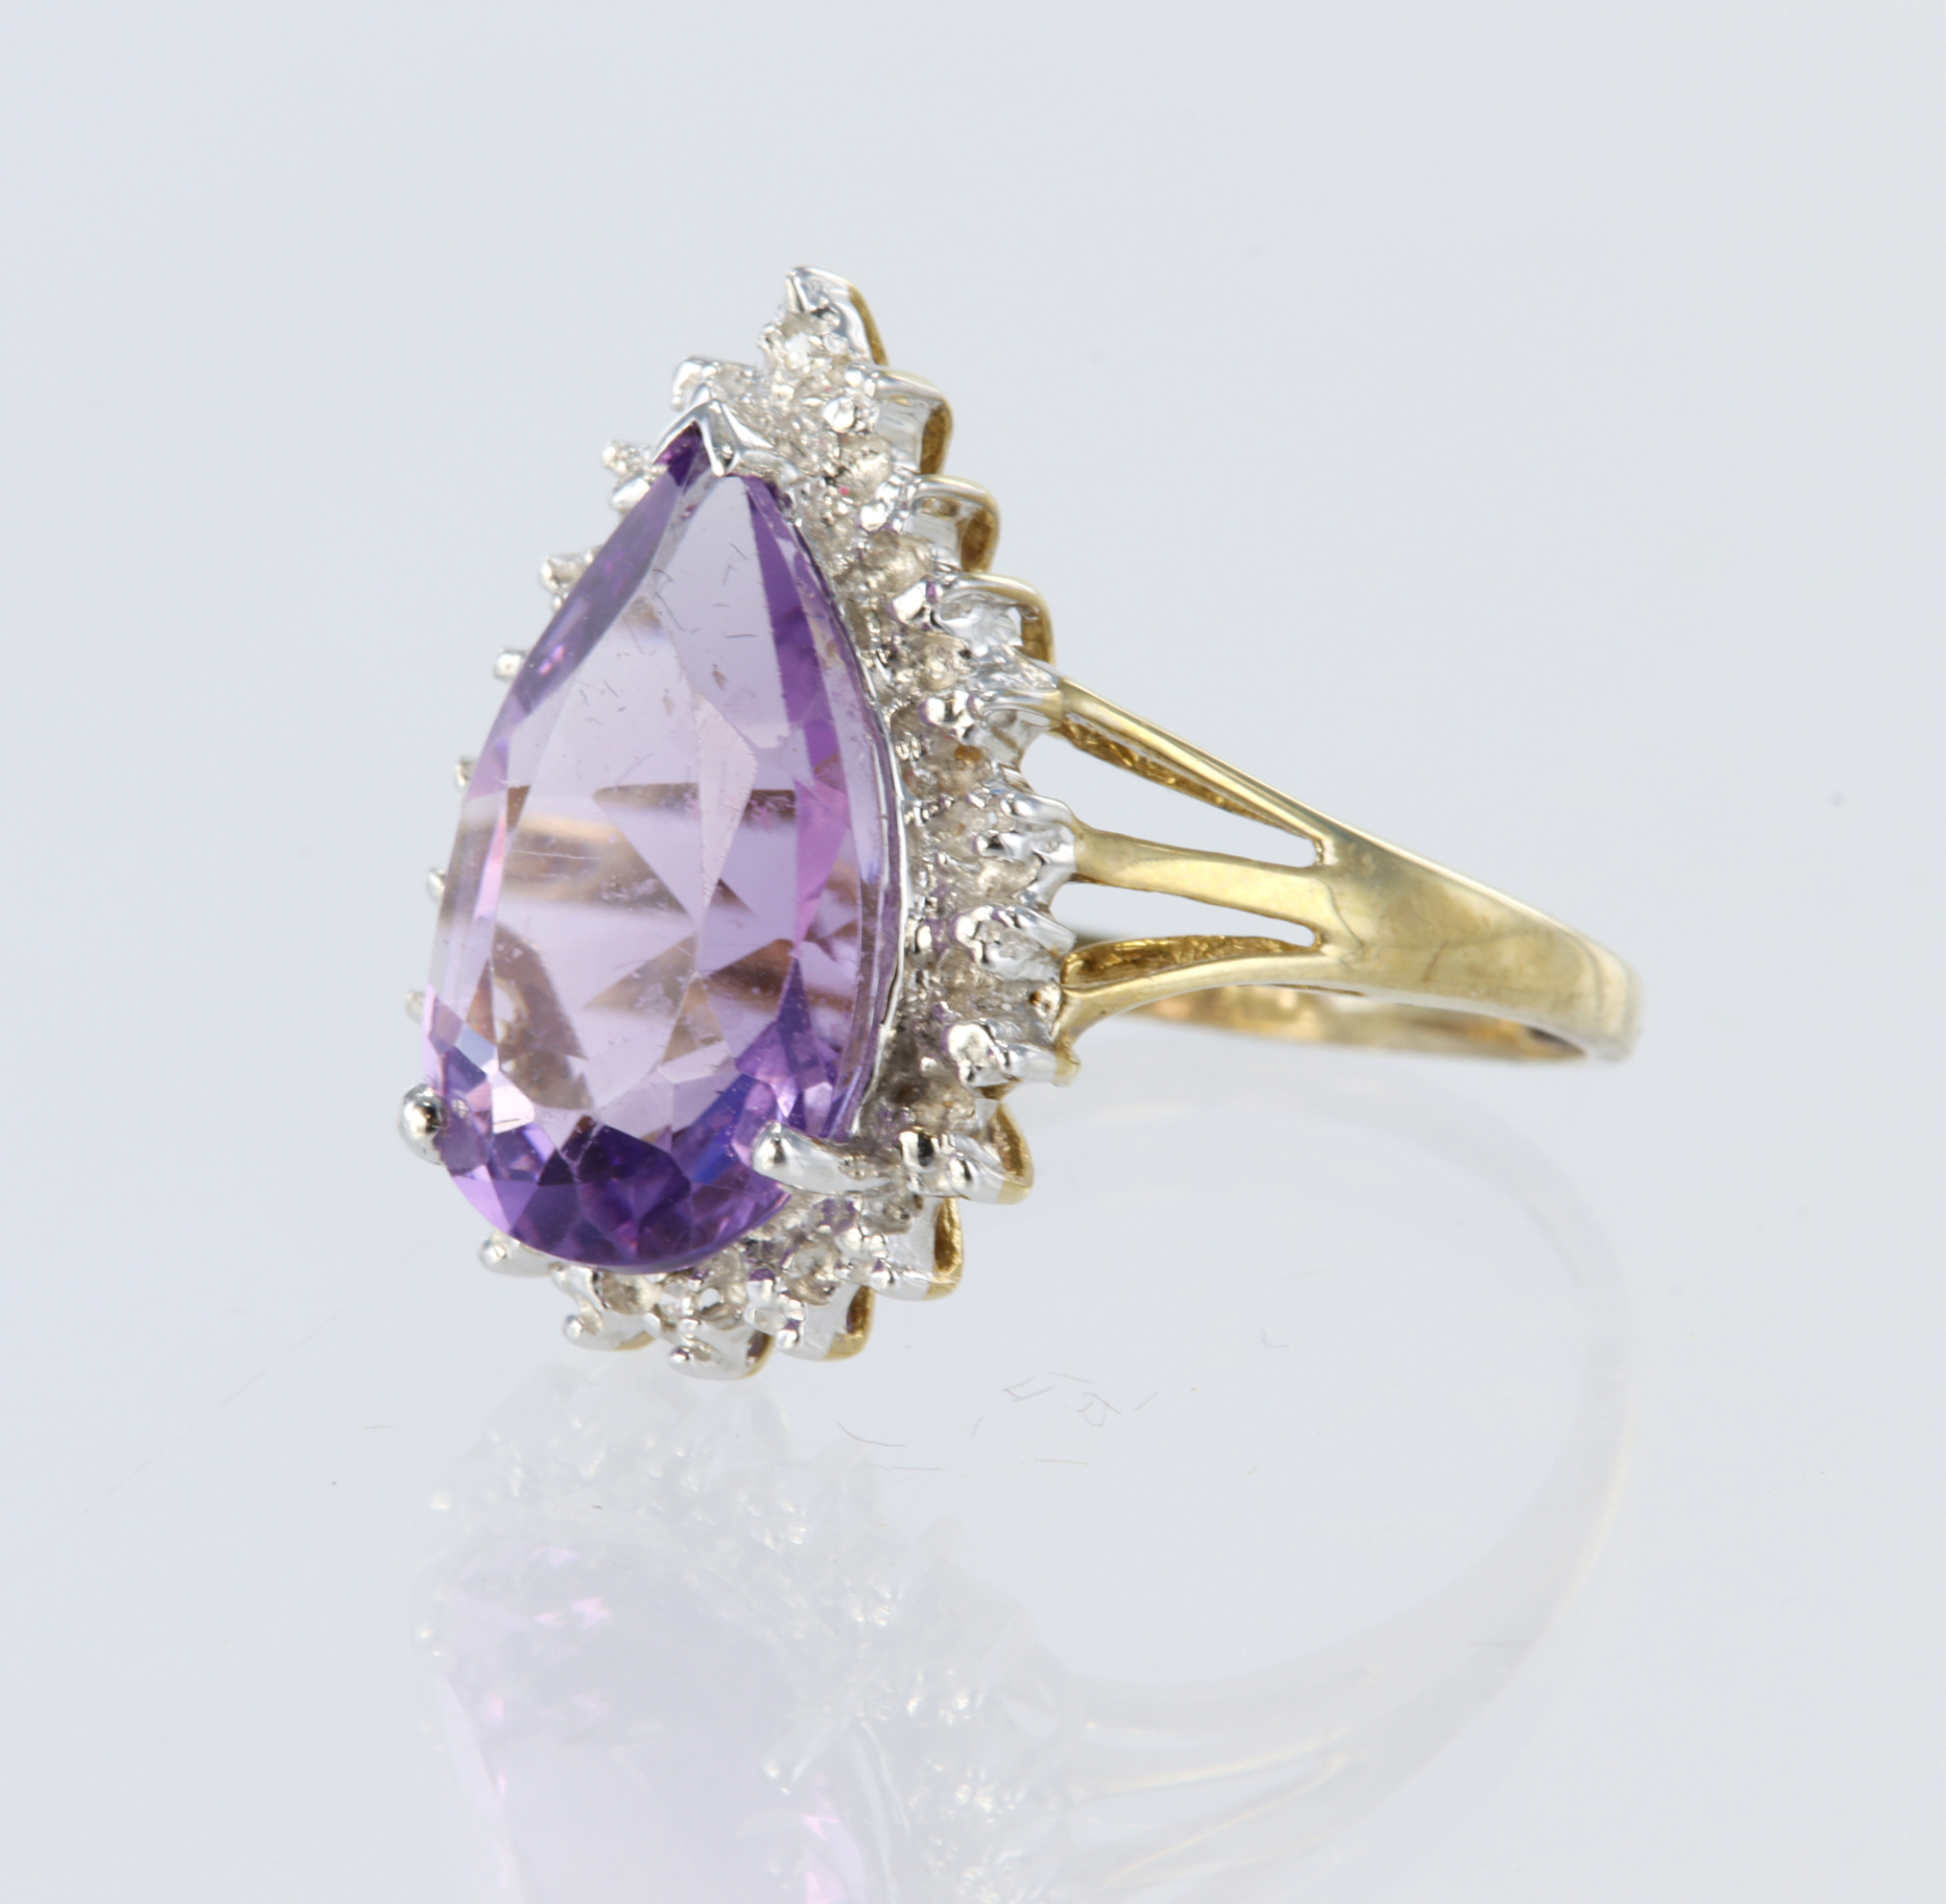 9ct yellow gold cluster dress ring set with a central pear shaped amethyst measuring approx. 14mm - Image 2 of 2